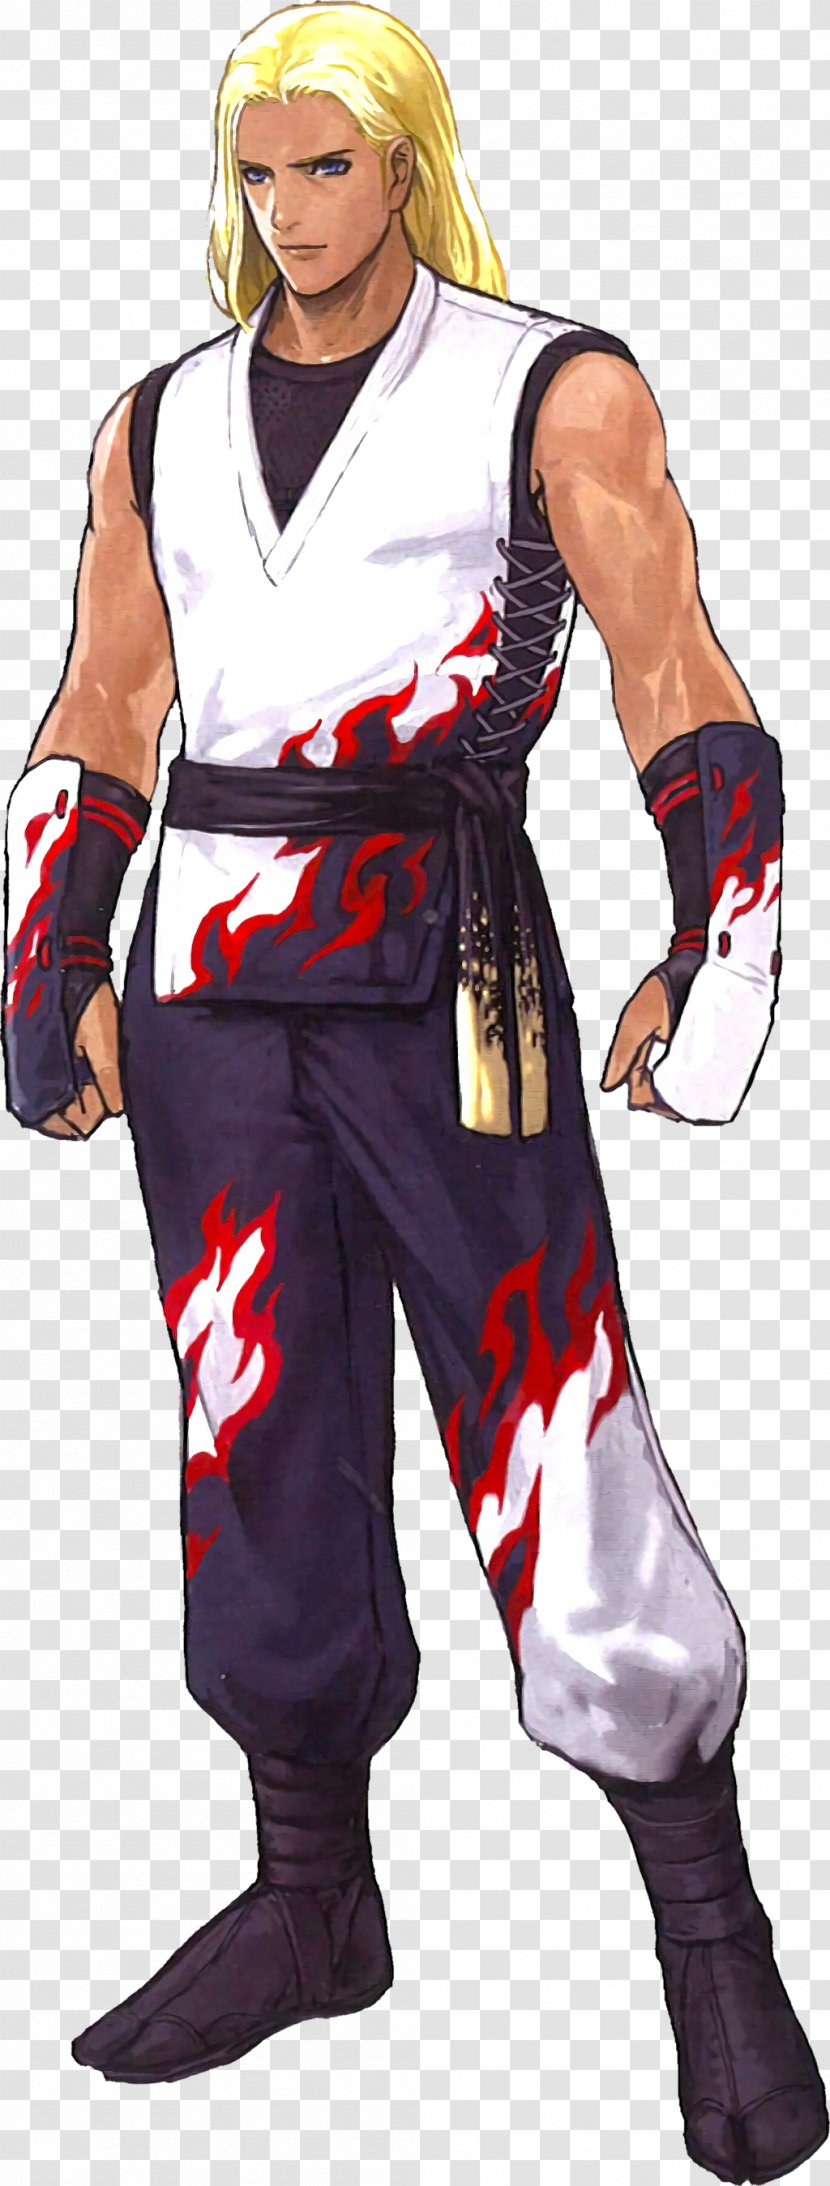 The King Of Fighters XIV '99 XIII Terry Bogard Andy - Kyo Kusanagi - 2002 Transparent PNG